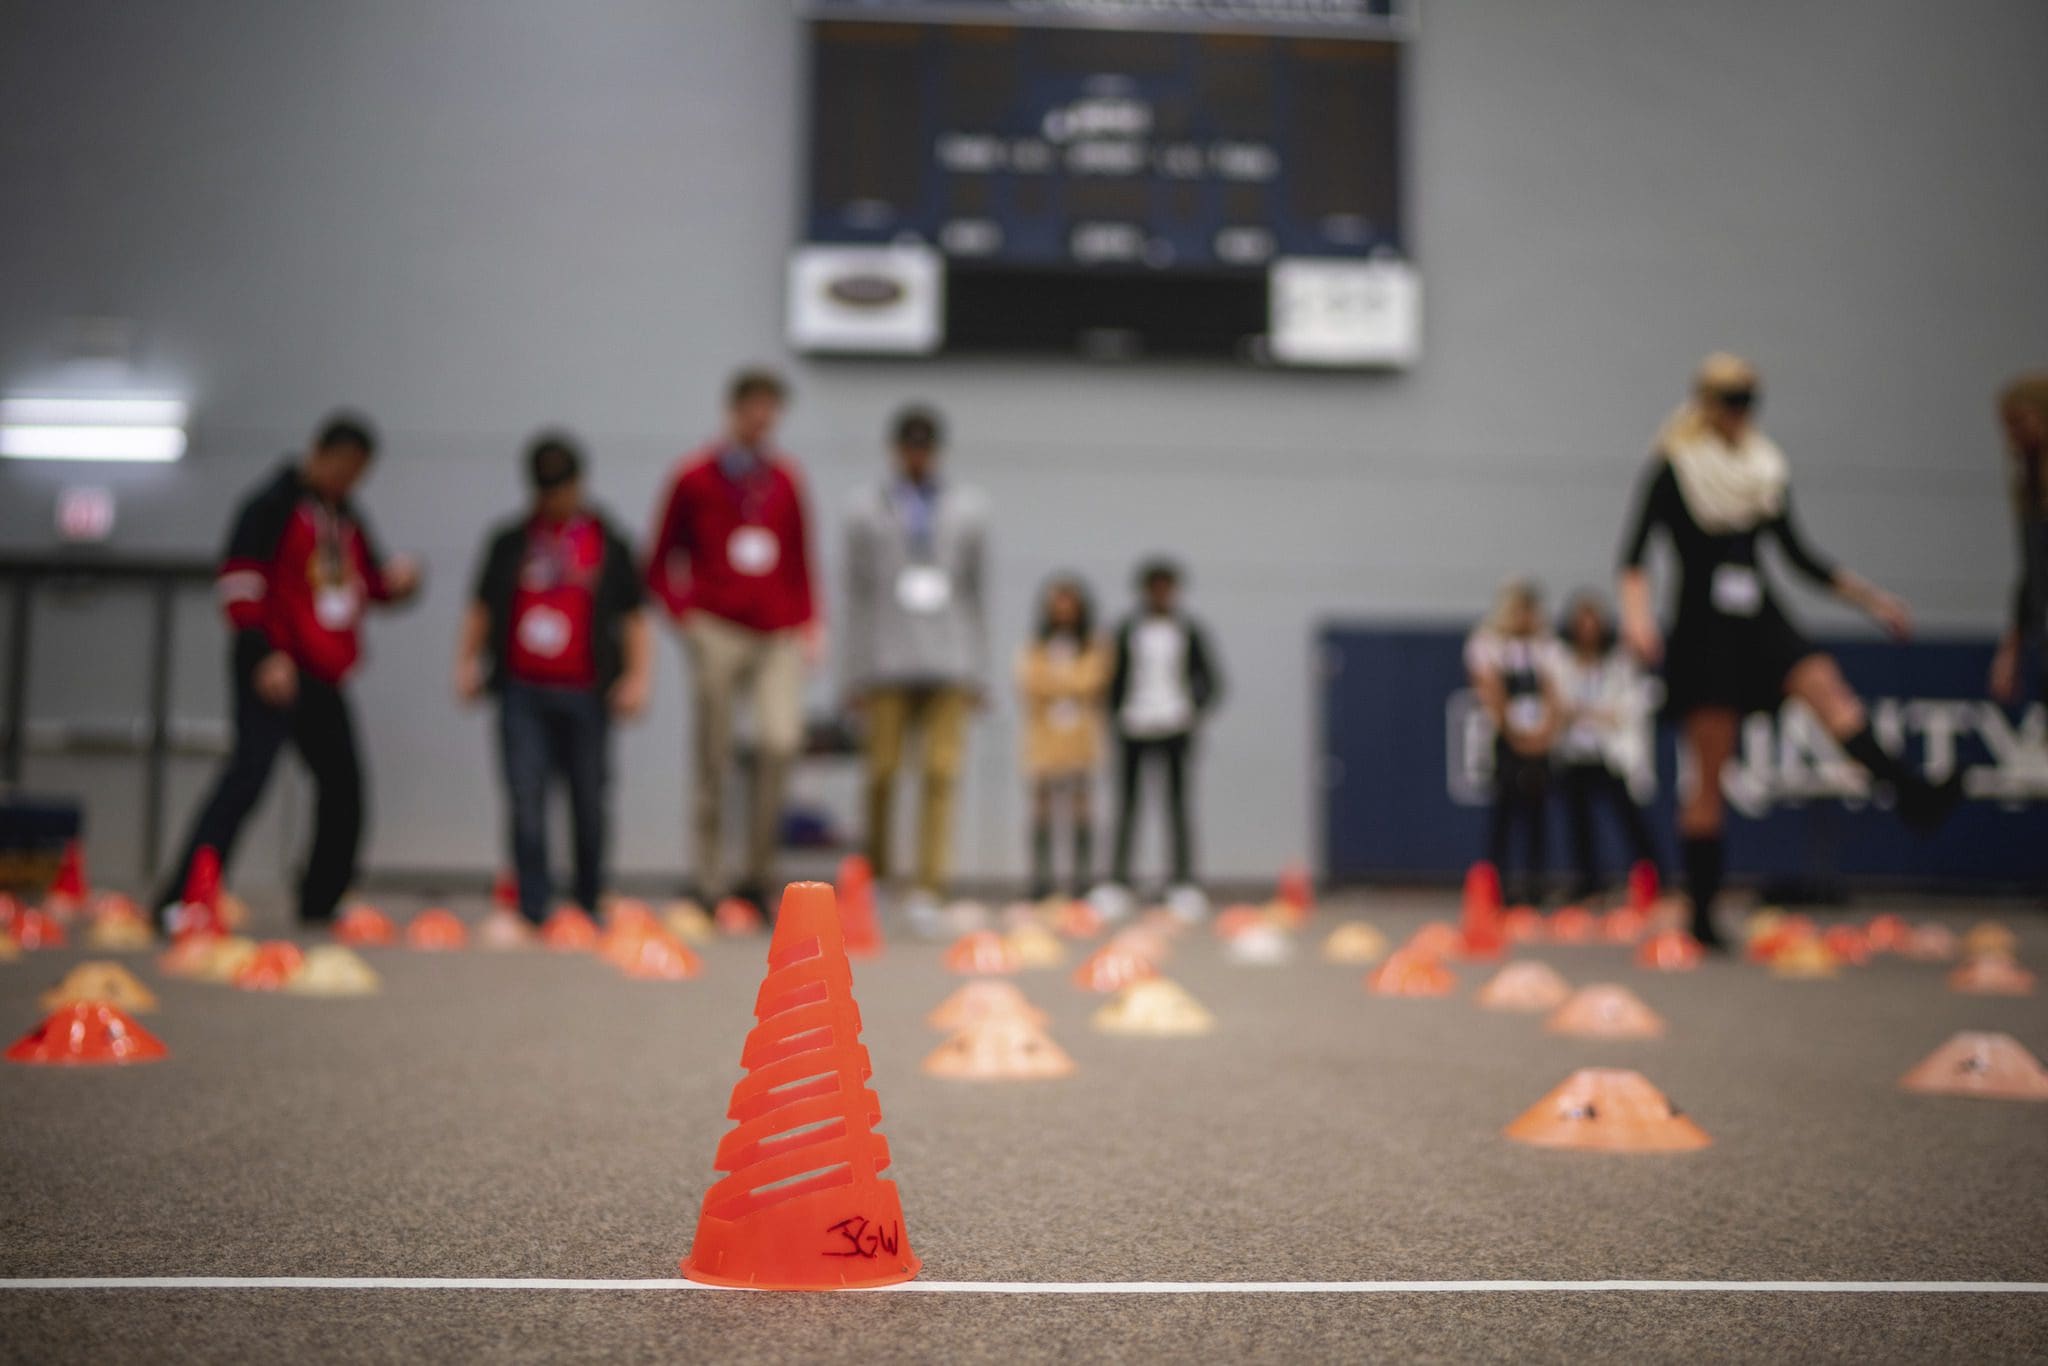 Trinity welcomed nearly 100 high school students from Chicago Christian, Timothy Christian, Naperville North, and Naperville Central, who competed in five events that were centered around innovation, creativity, and teamwork.